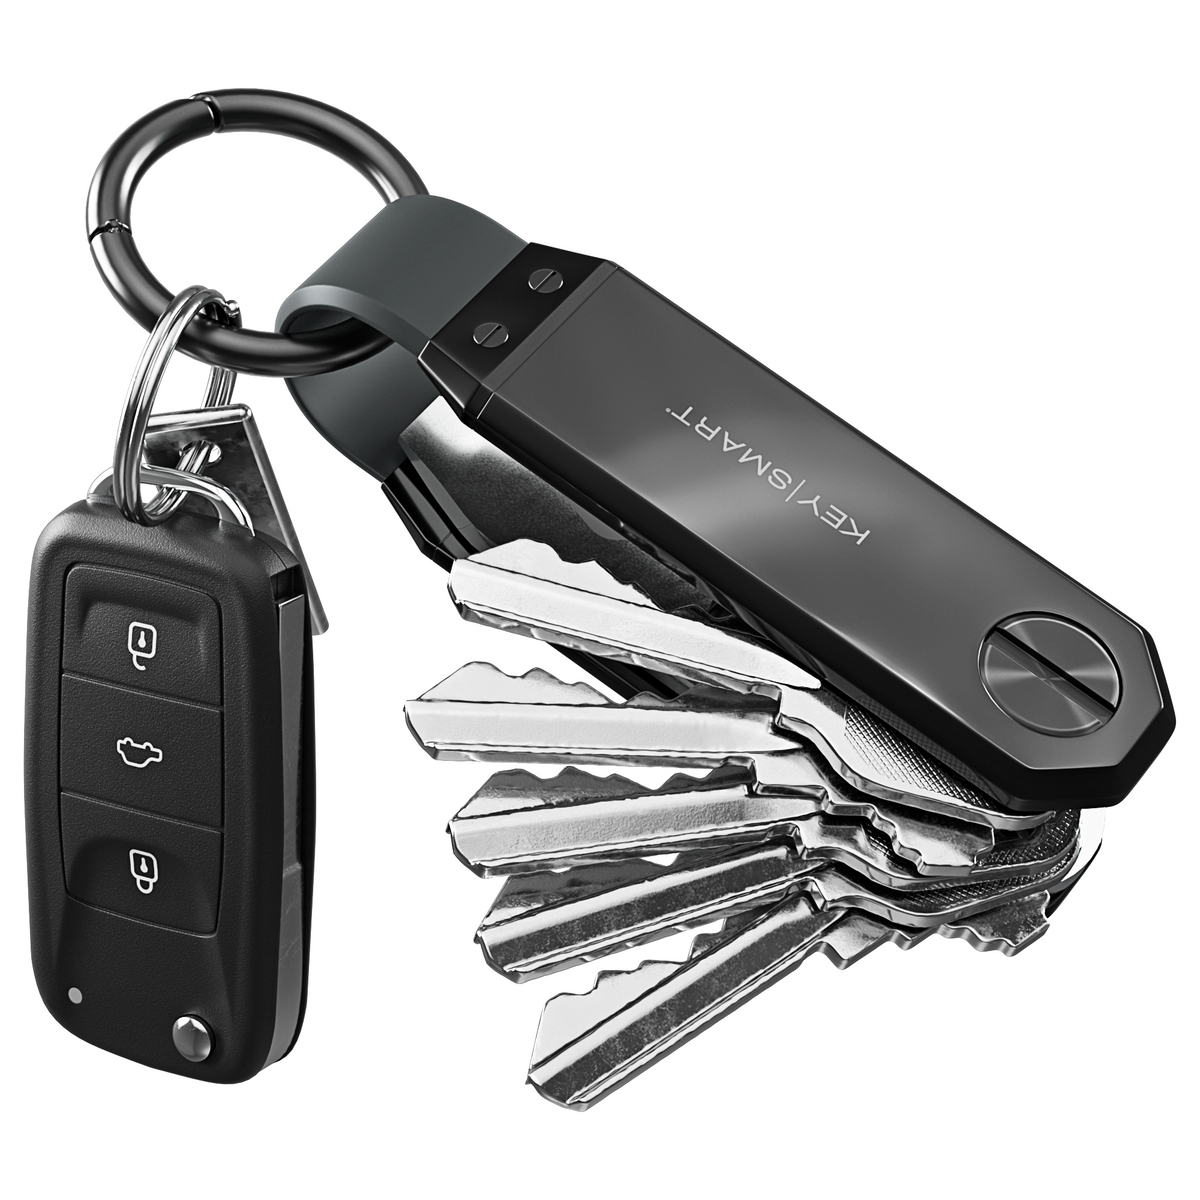 KeySmart Key Tags with labels - 3 Durable, Felixible & Lightweight Plastic  Key Chain Tags with Identification Window and Easy Paper Insert Slot for